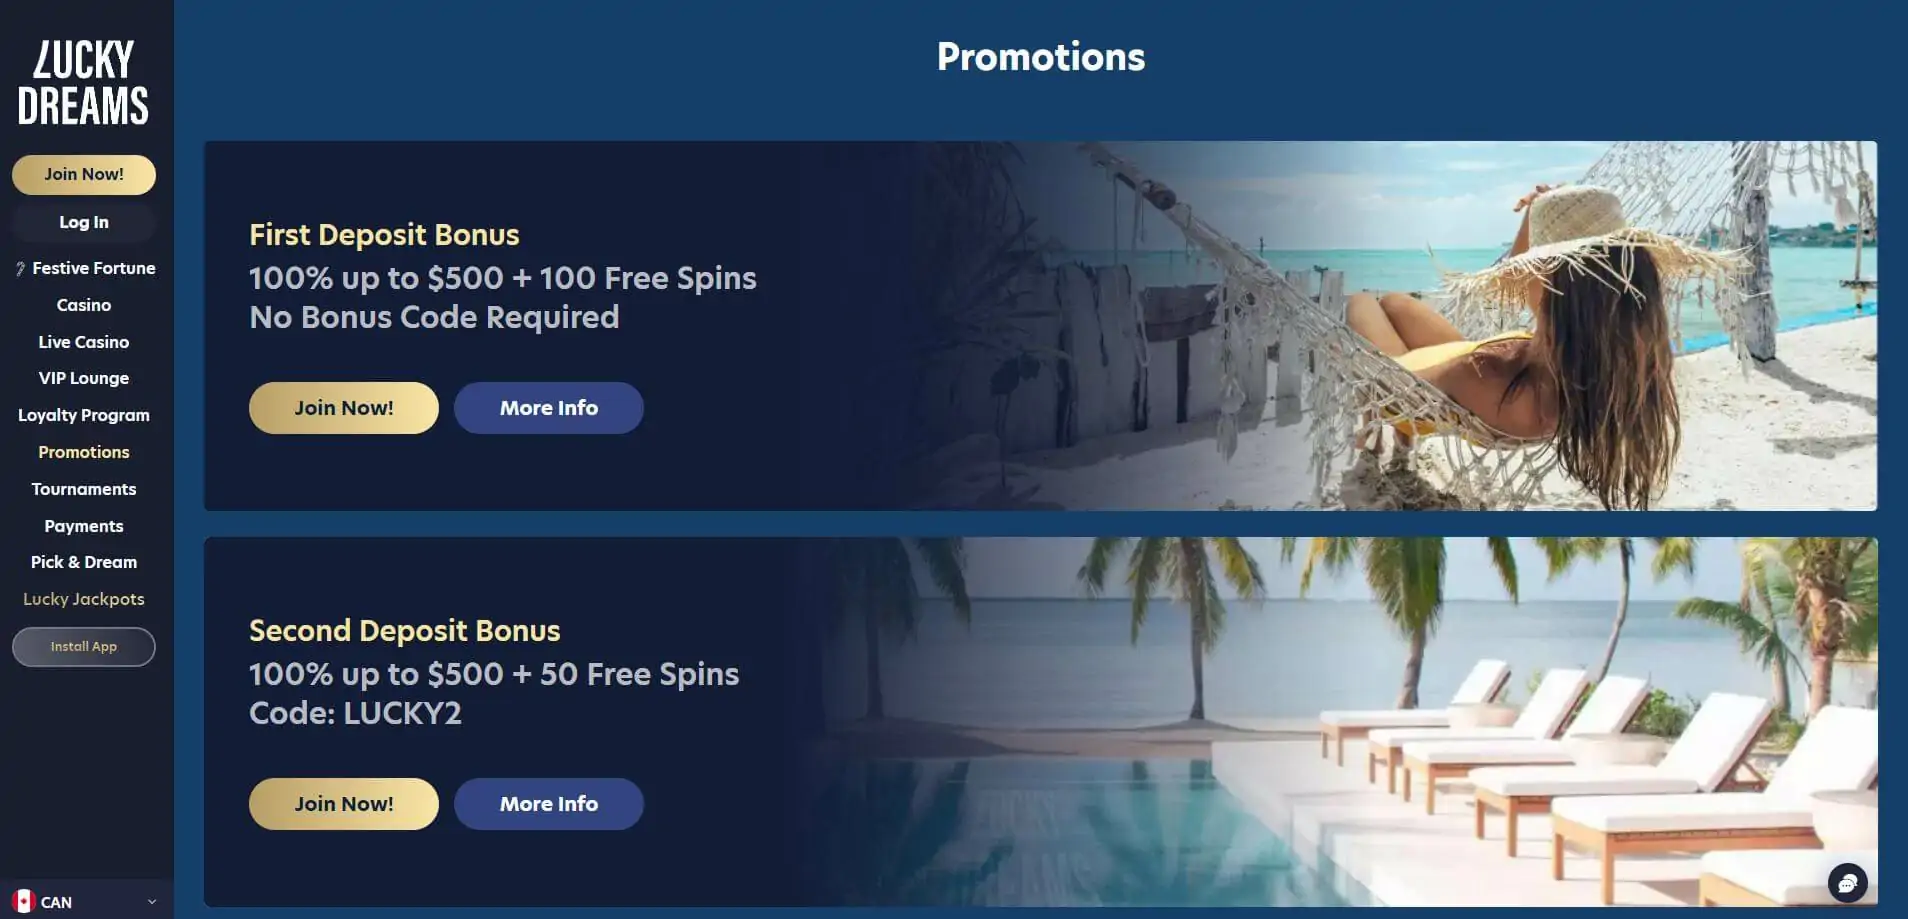 Lucky Dreams Casino Promotions